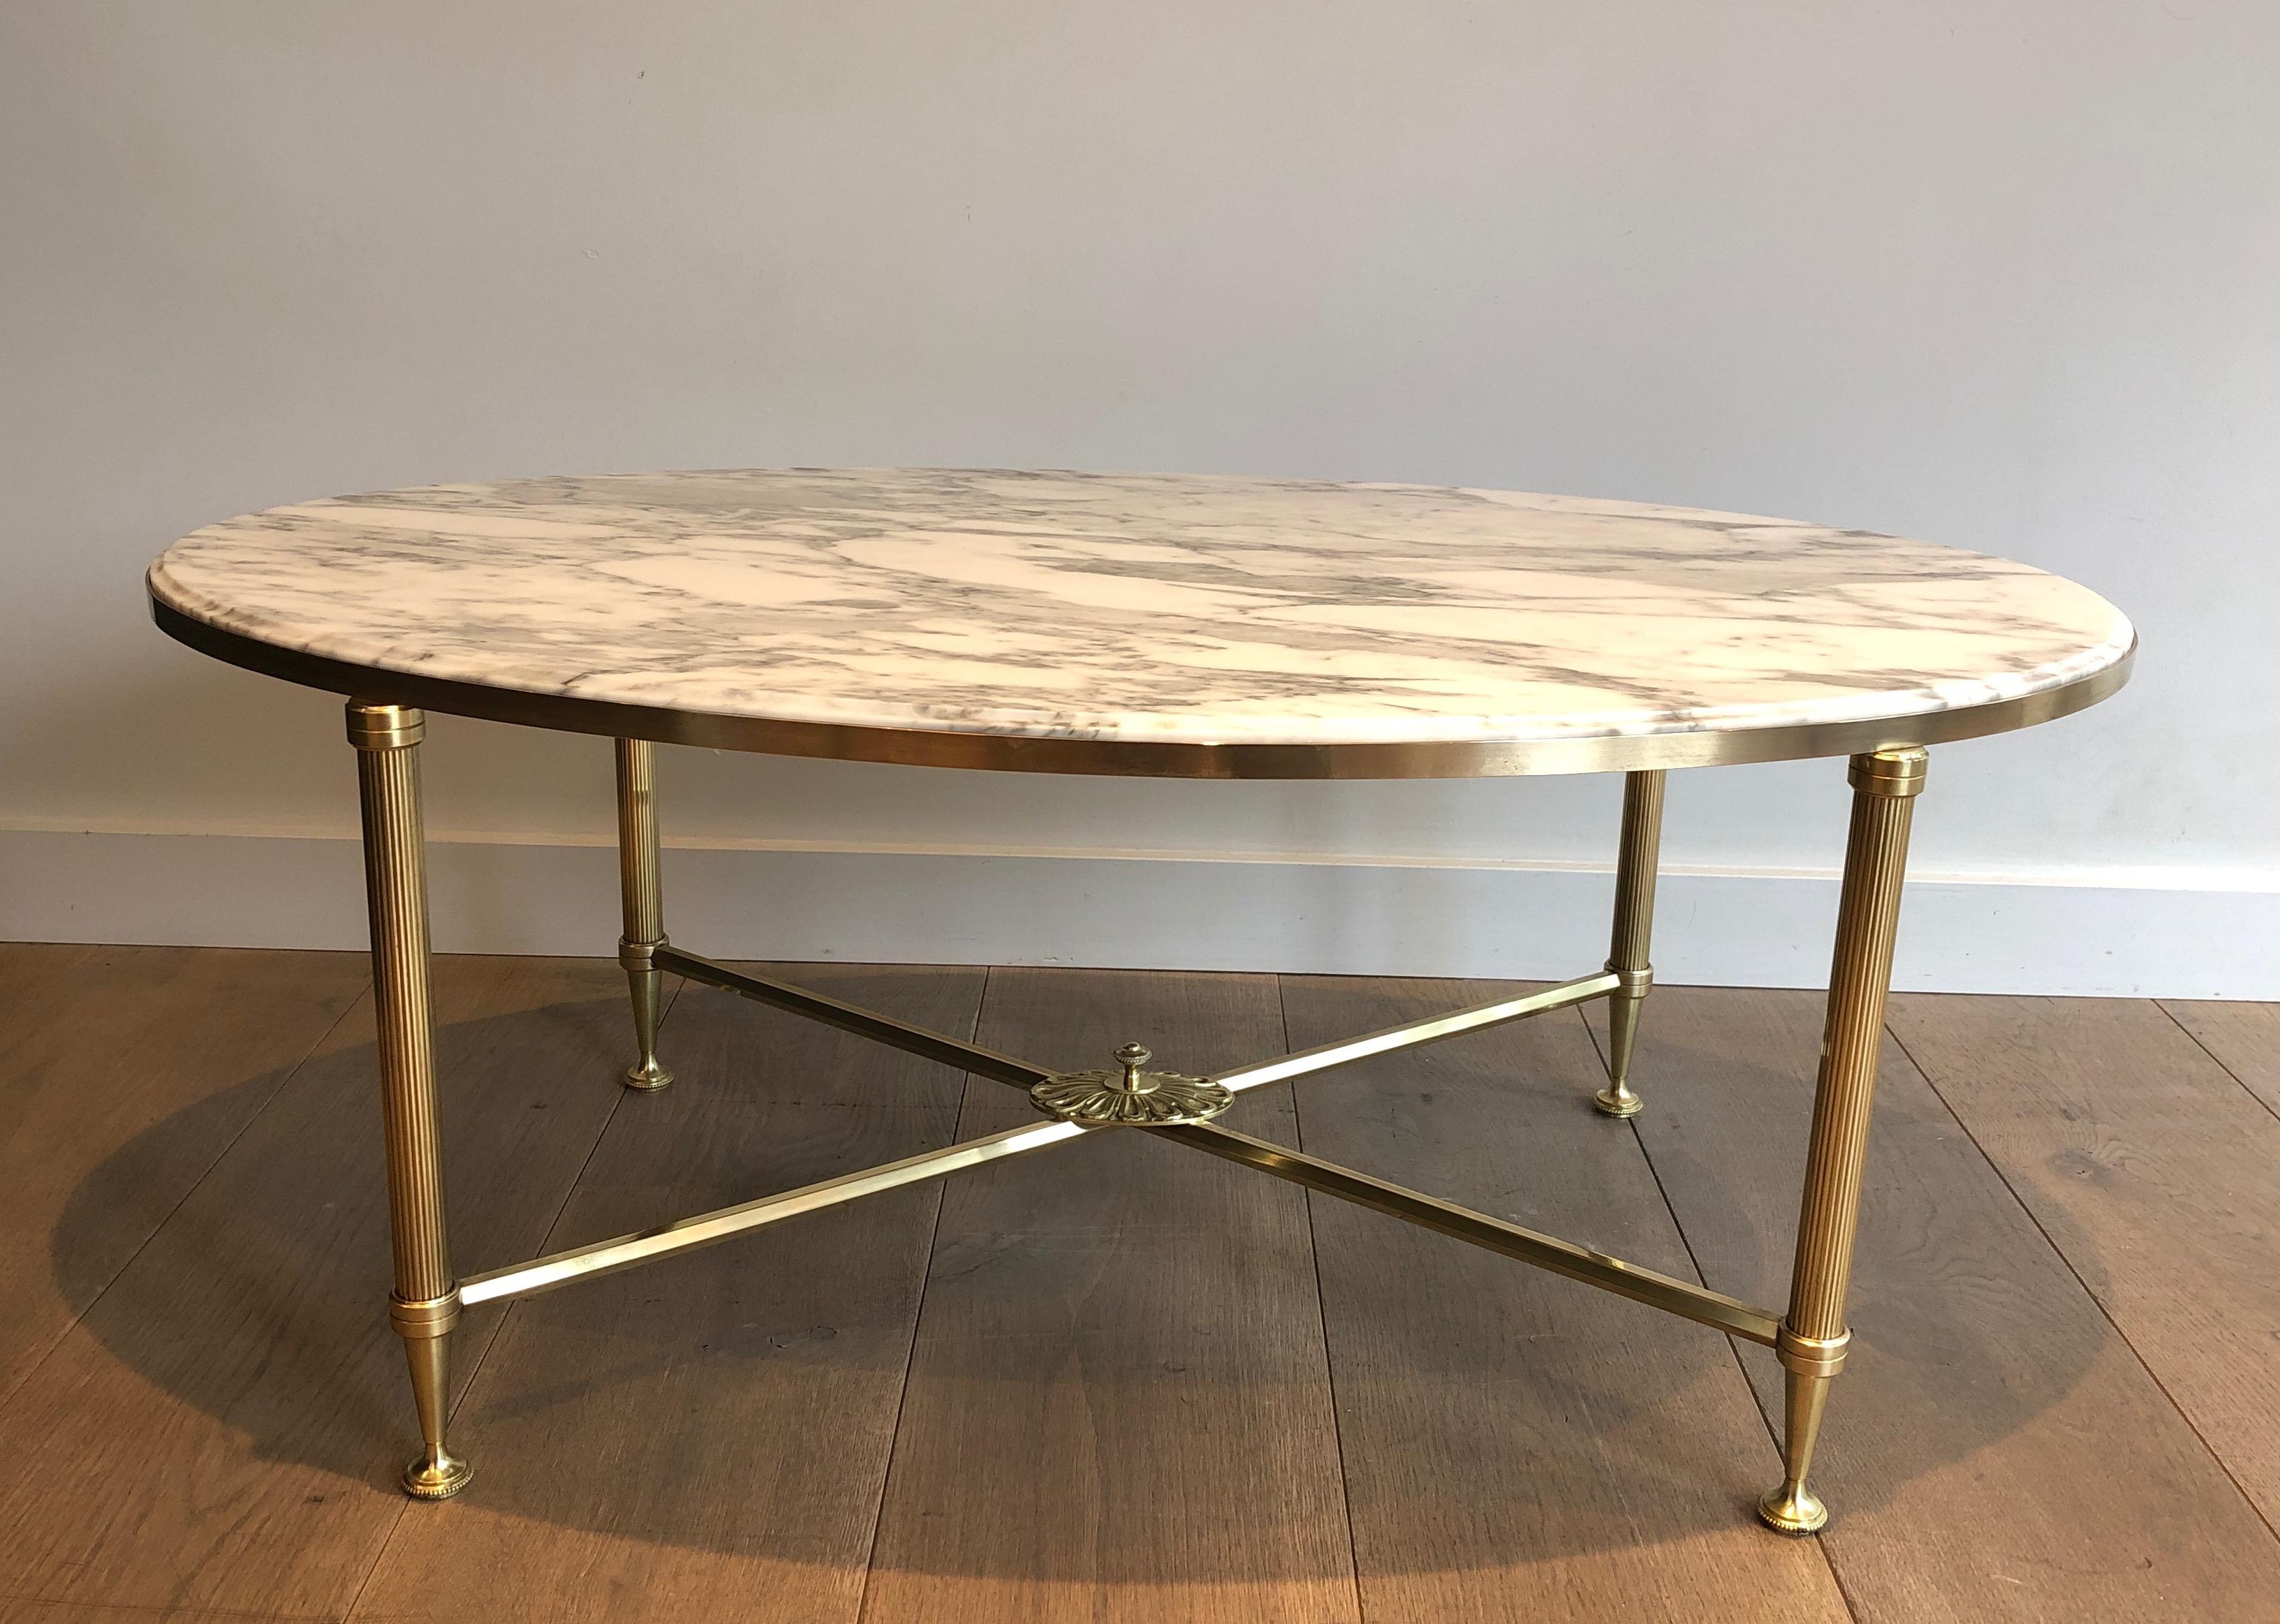 This rare neoclassical style oval coffee table is made of brass with a Carrara white marble top. This is a very nice and unusual model in this oval shape. This is a French work by Maison Jansen. Circa 1940